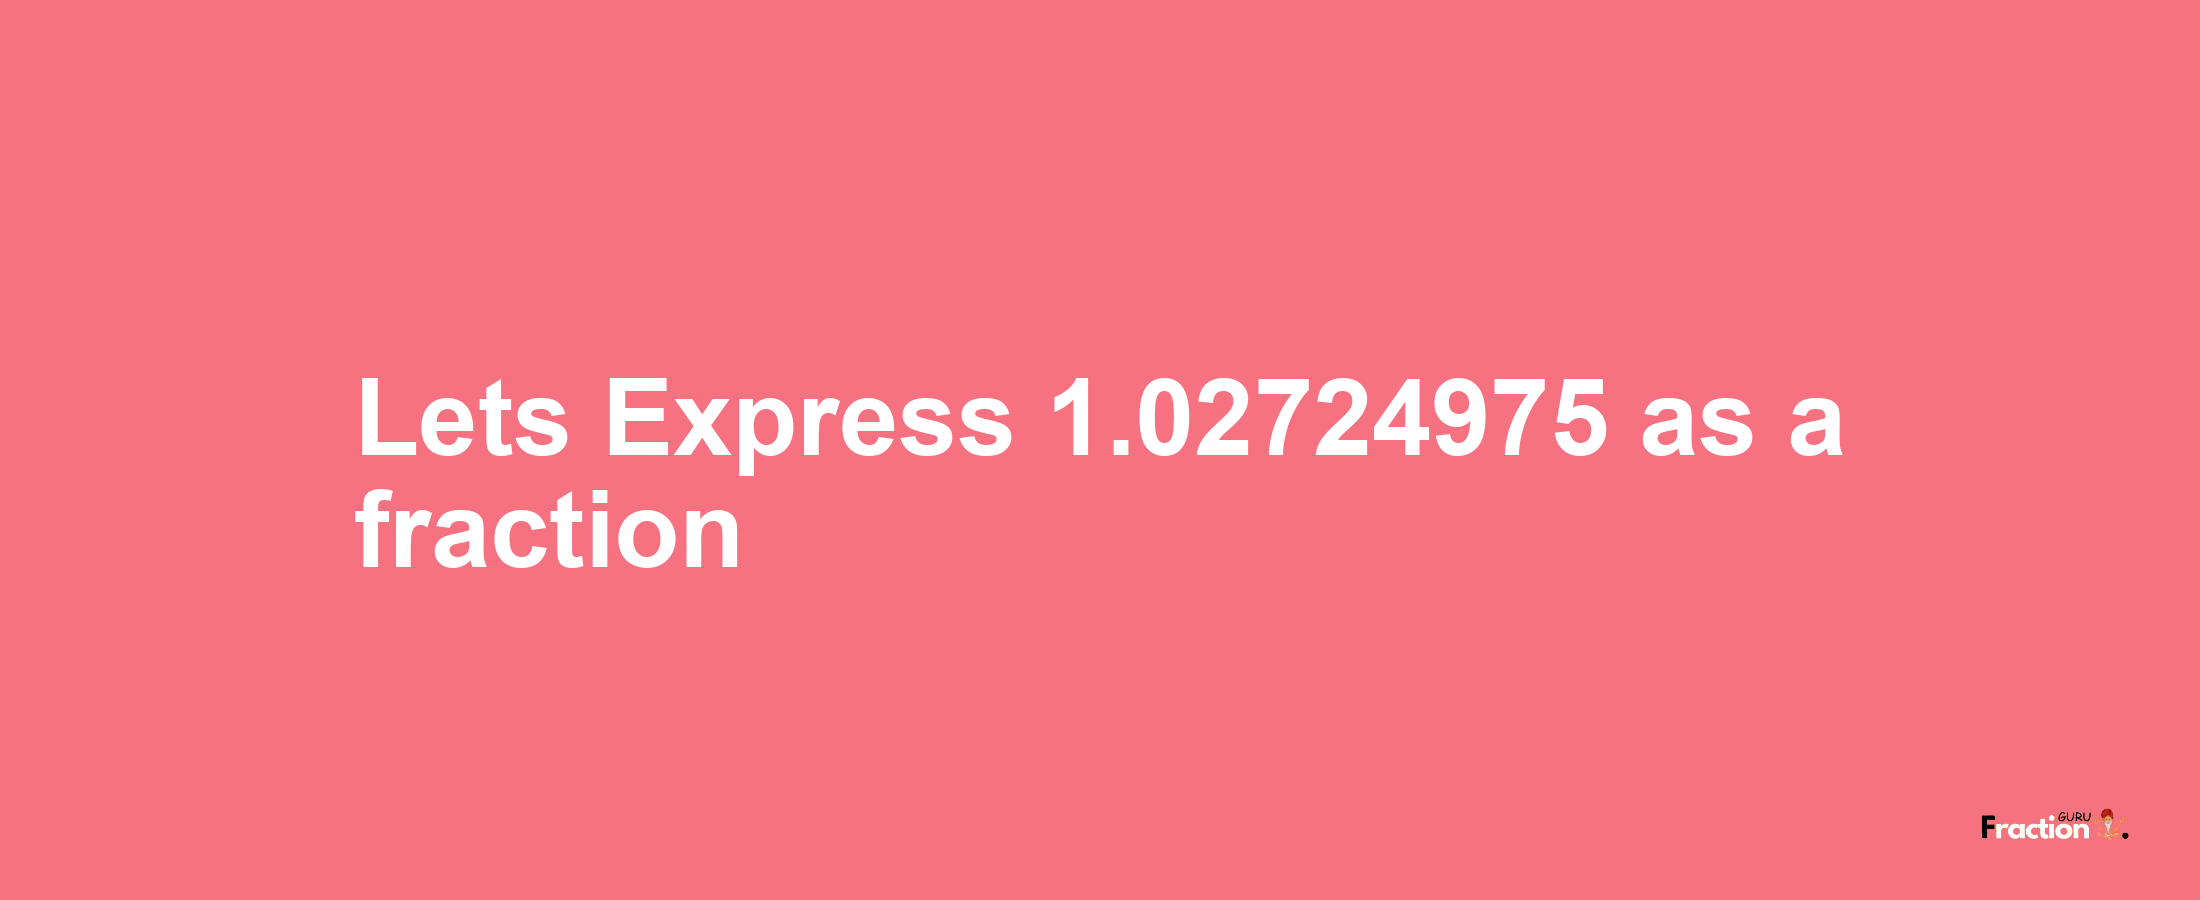 Lets Express 1.02724975 as afraction